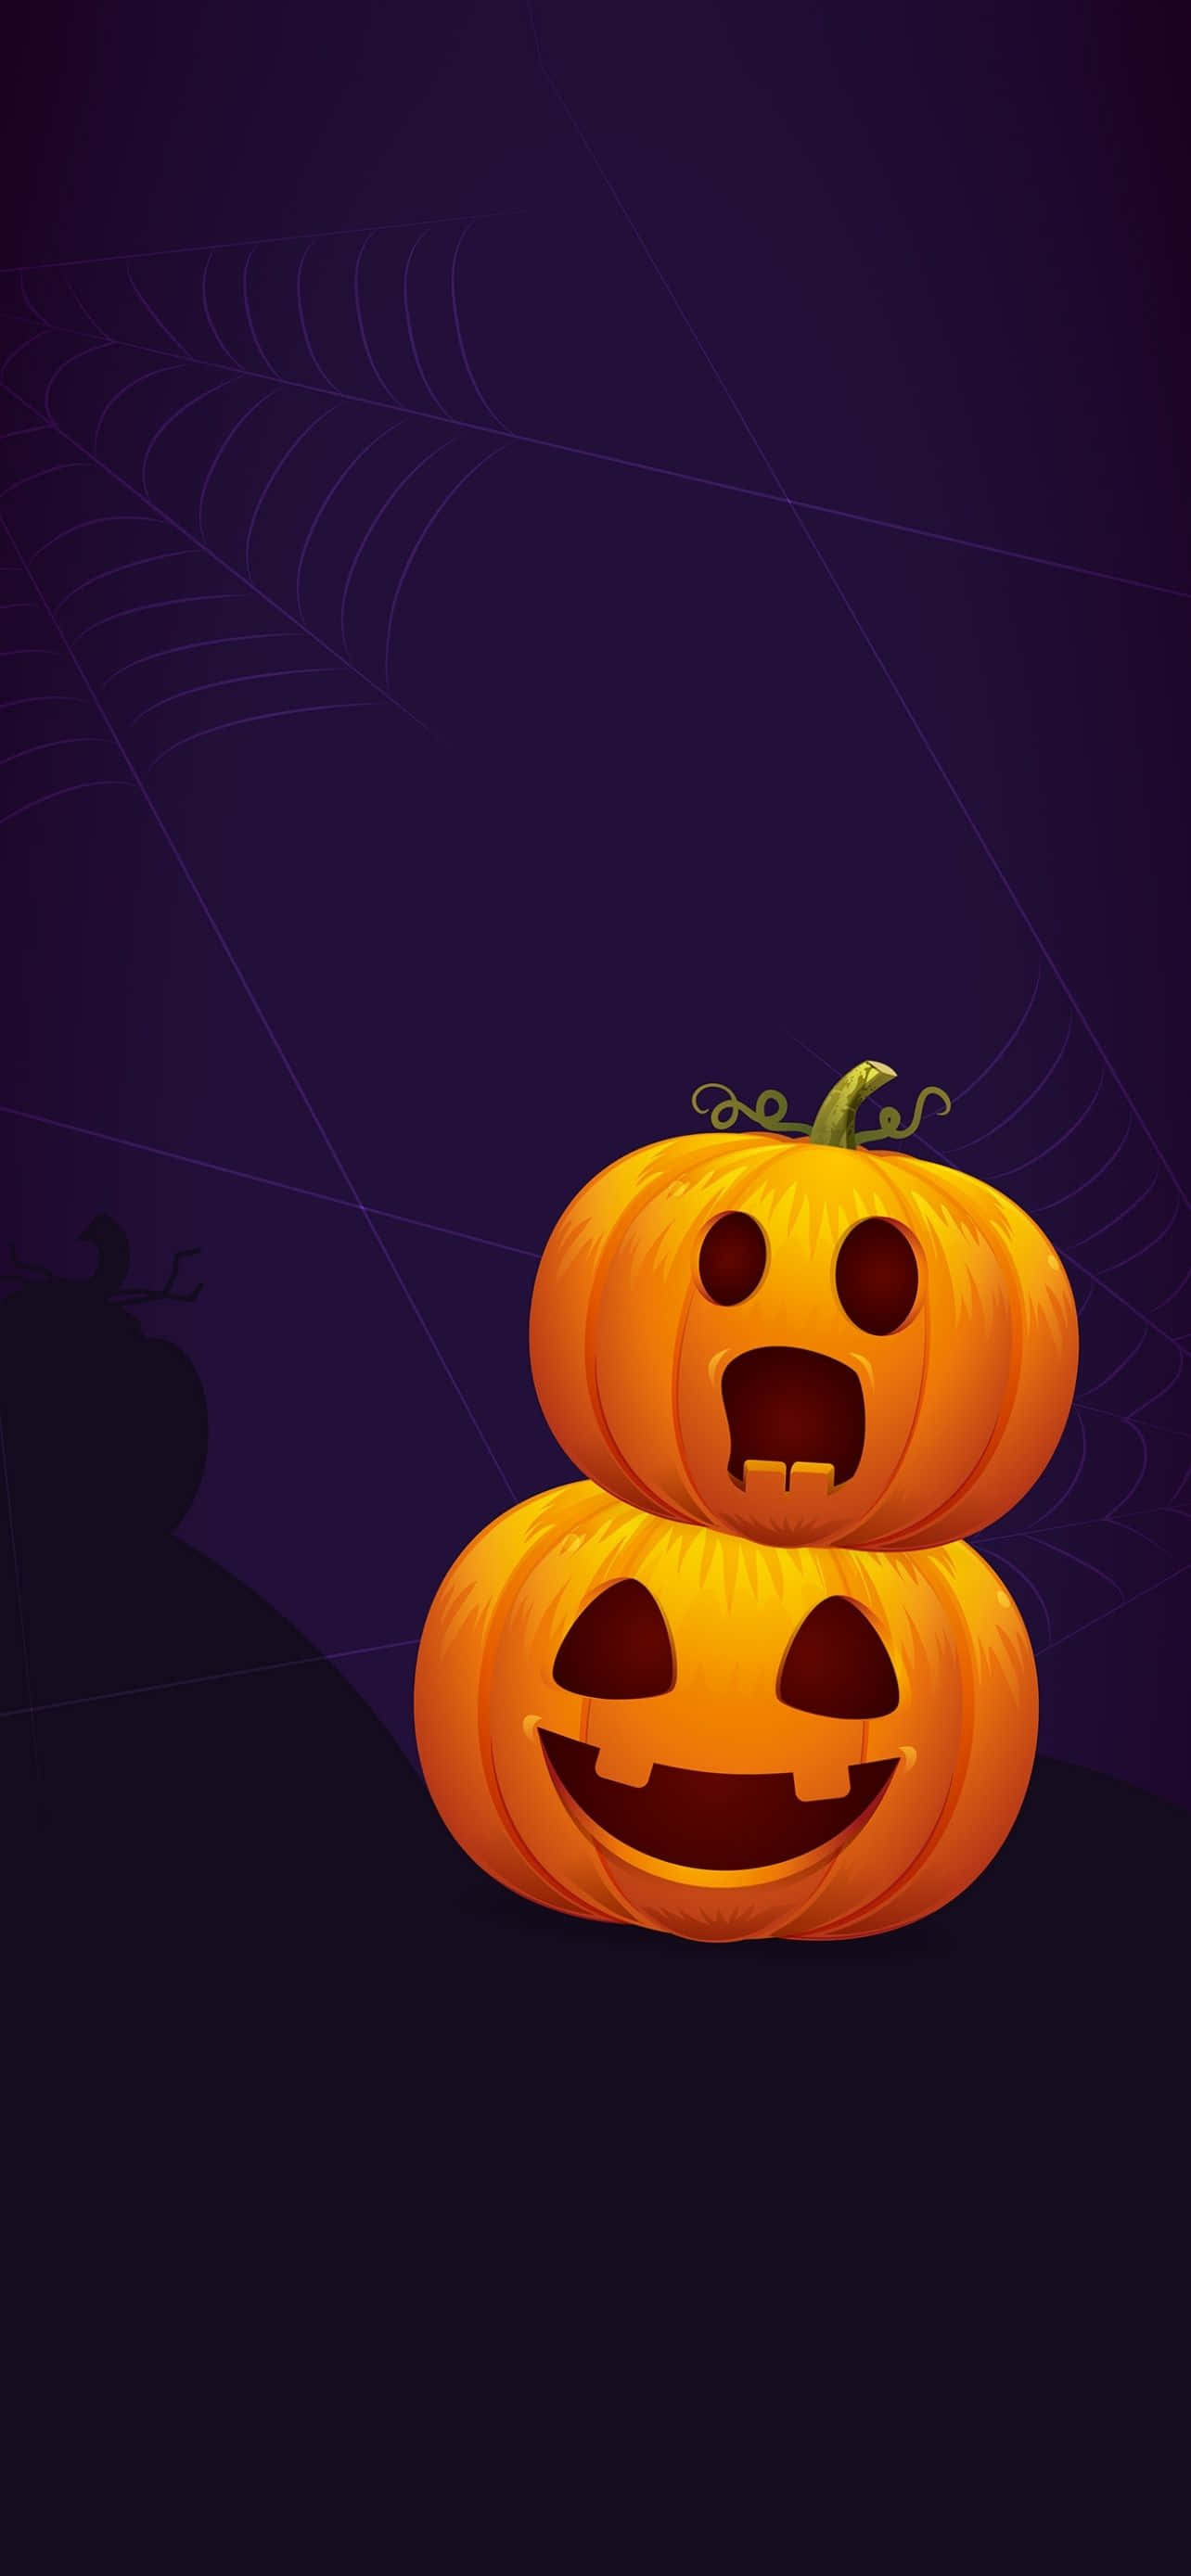 In the spirit of Halloween, spookify your iPhones screen with this special wallpaper